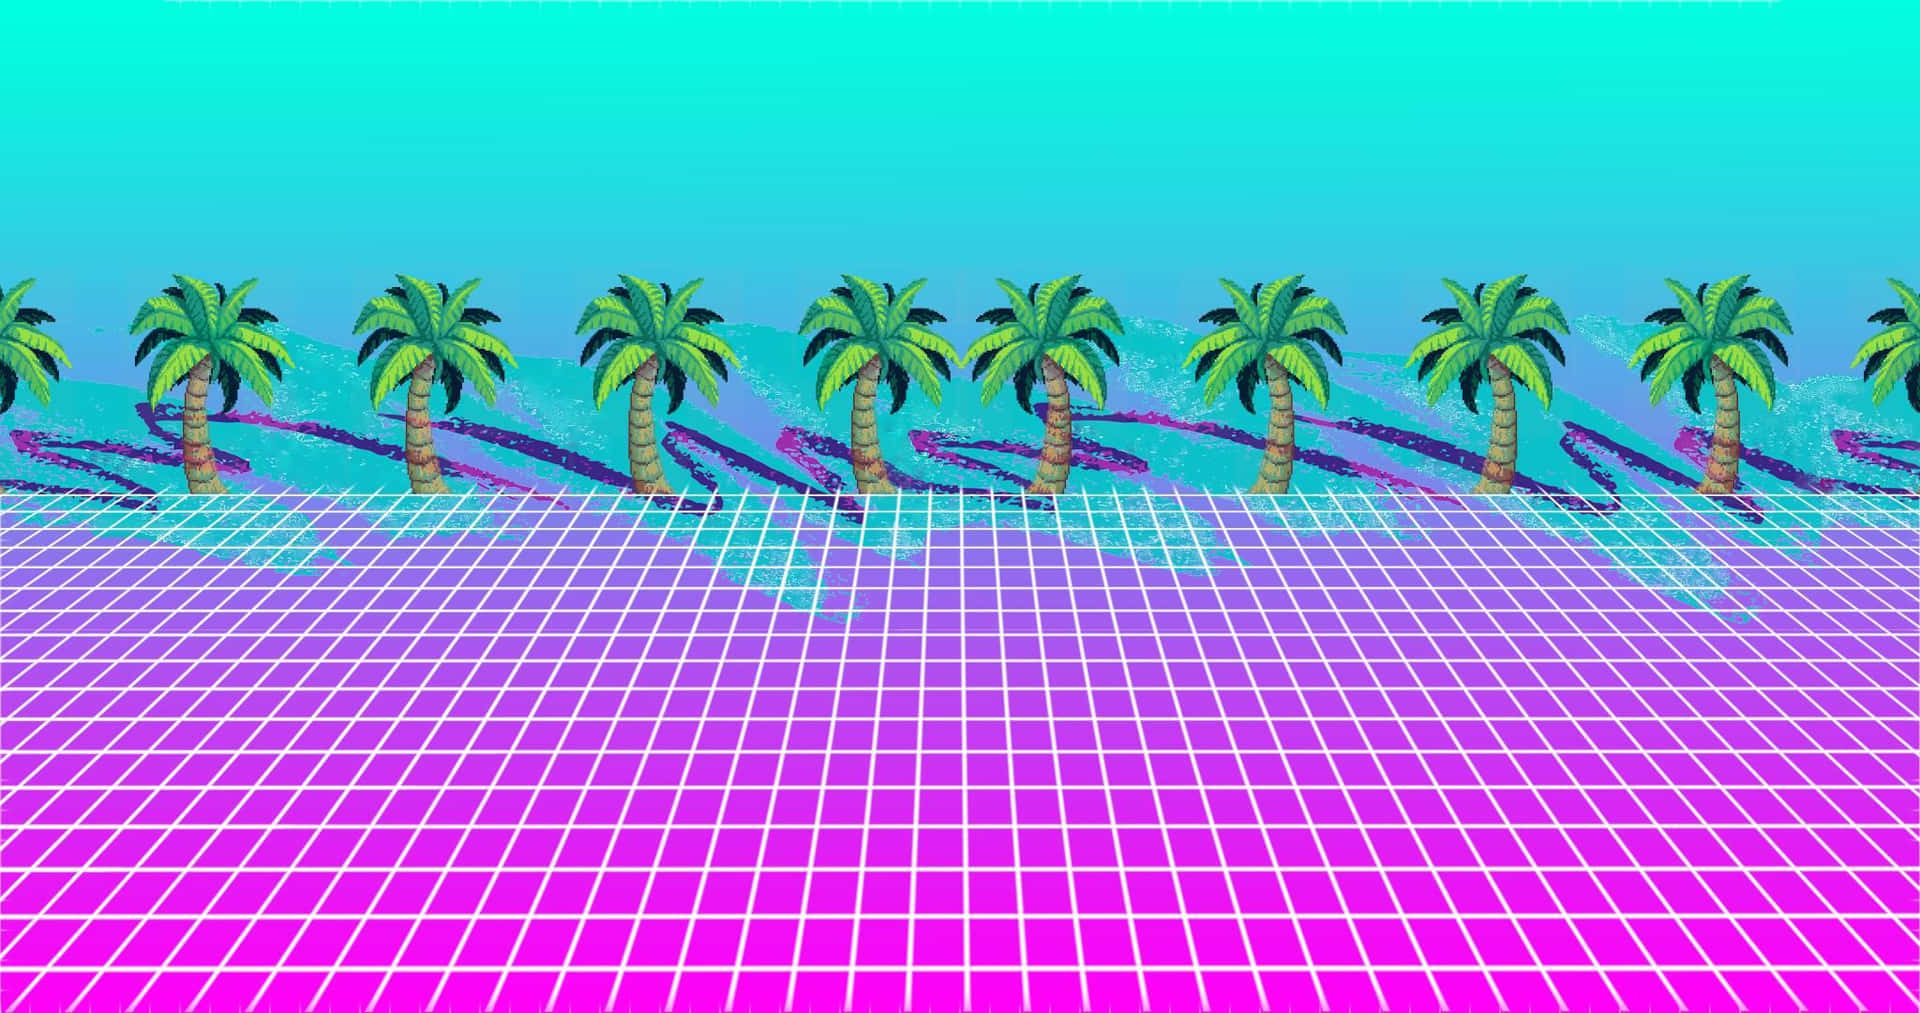 Stay connected and stylish with the new Vaporwave Tablet Wallpaper